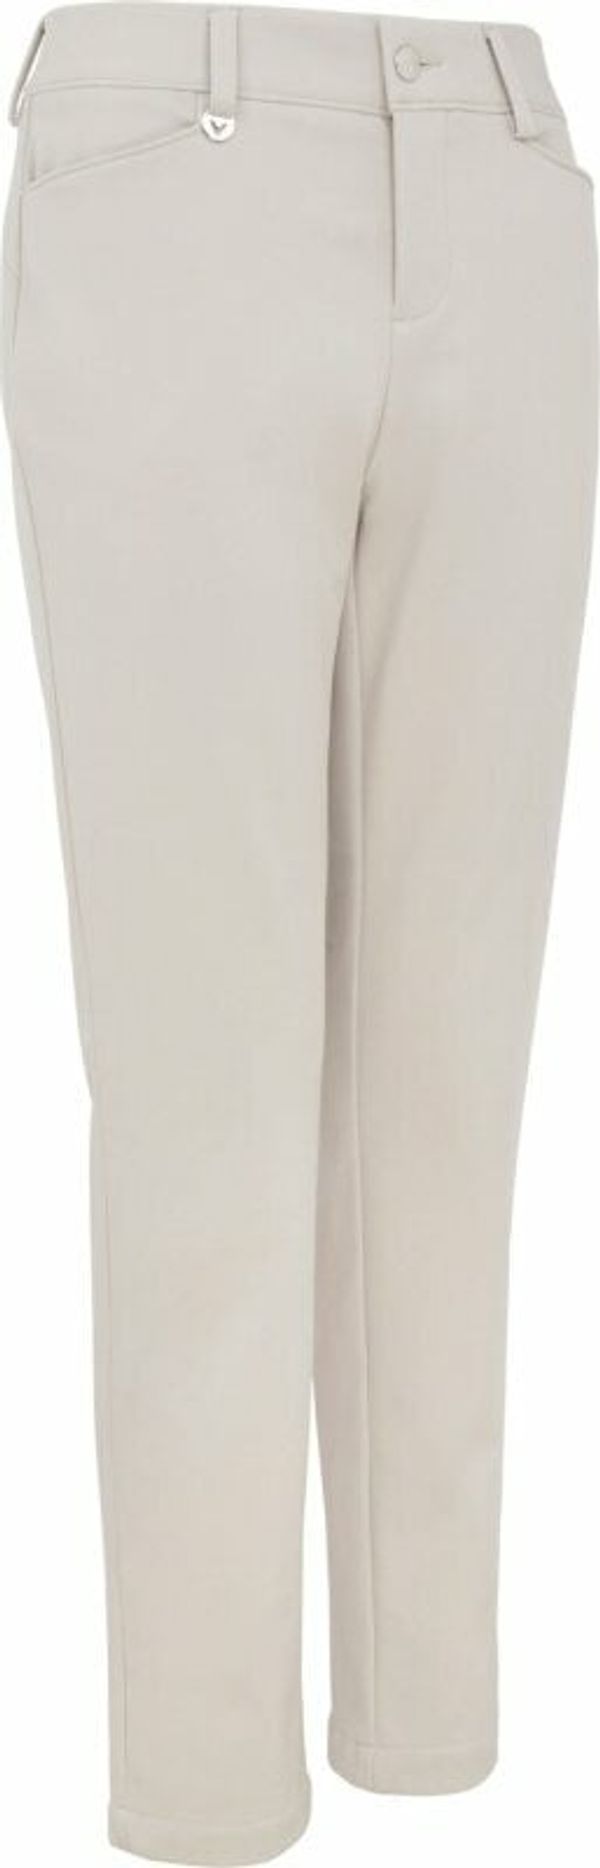 Callaway Callaway Thermal Womens Trousers Chateau Gray 4/29